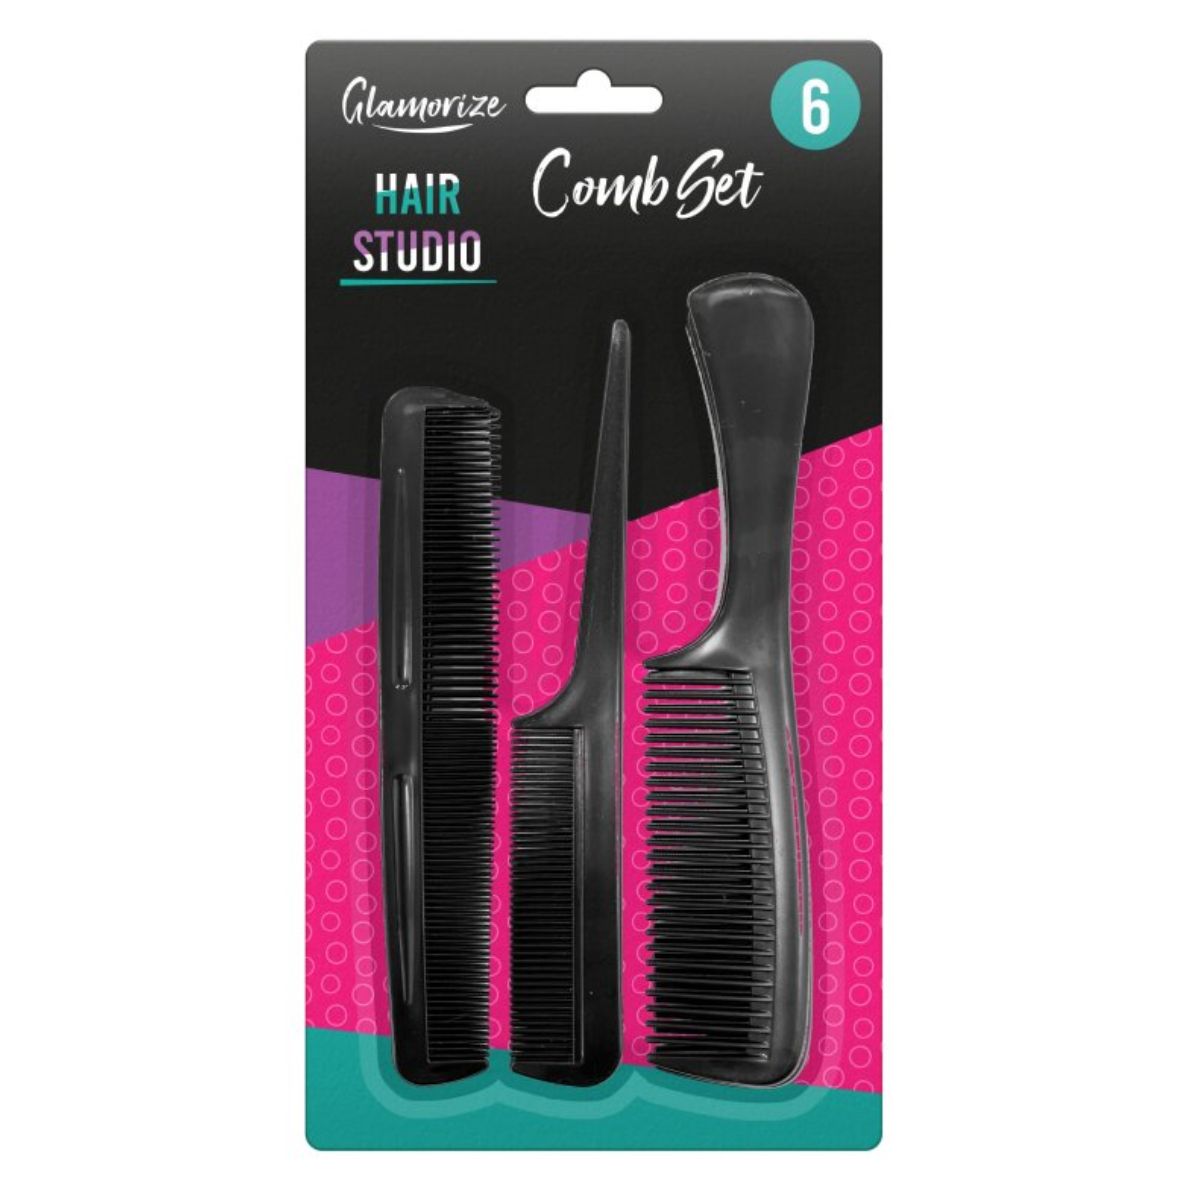 A six-piece Clamorize - Hair Comb Set packaged on a retail display card.